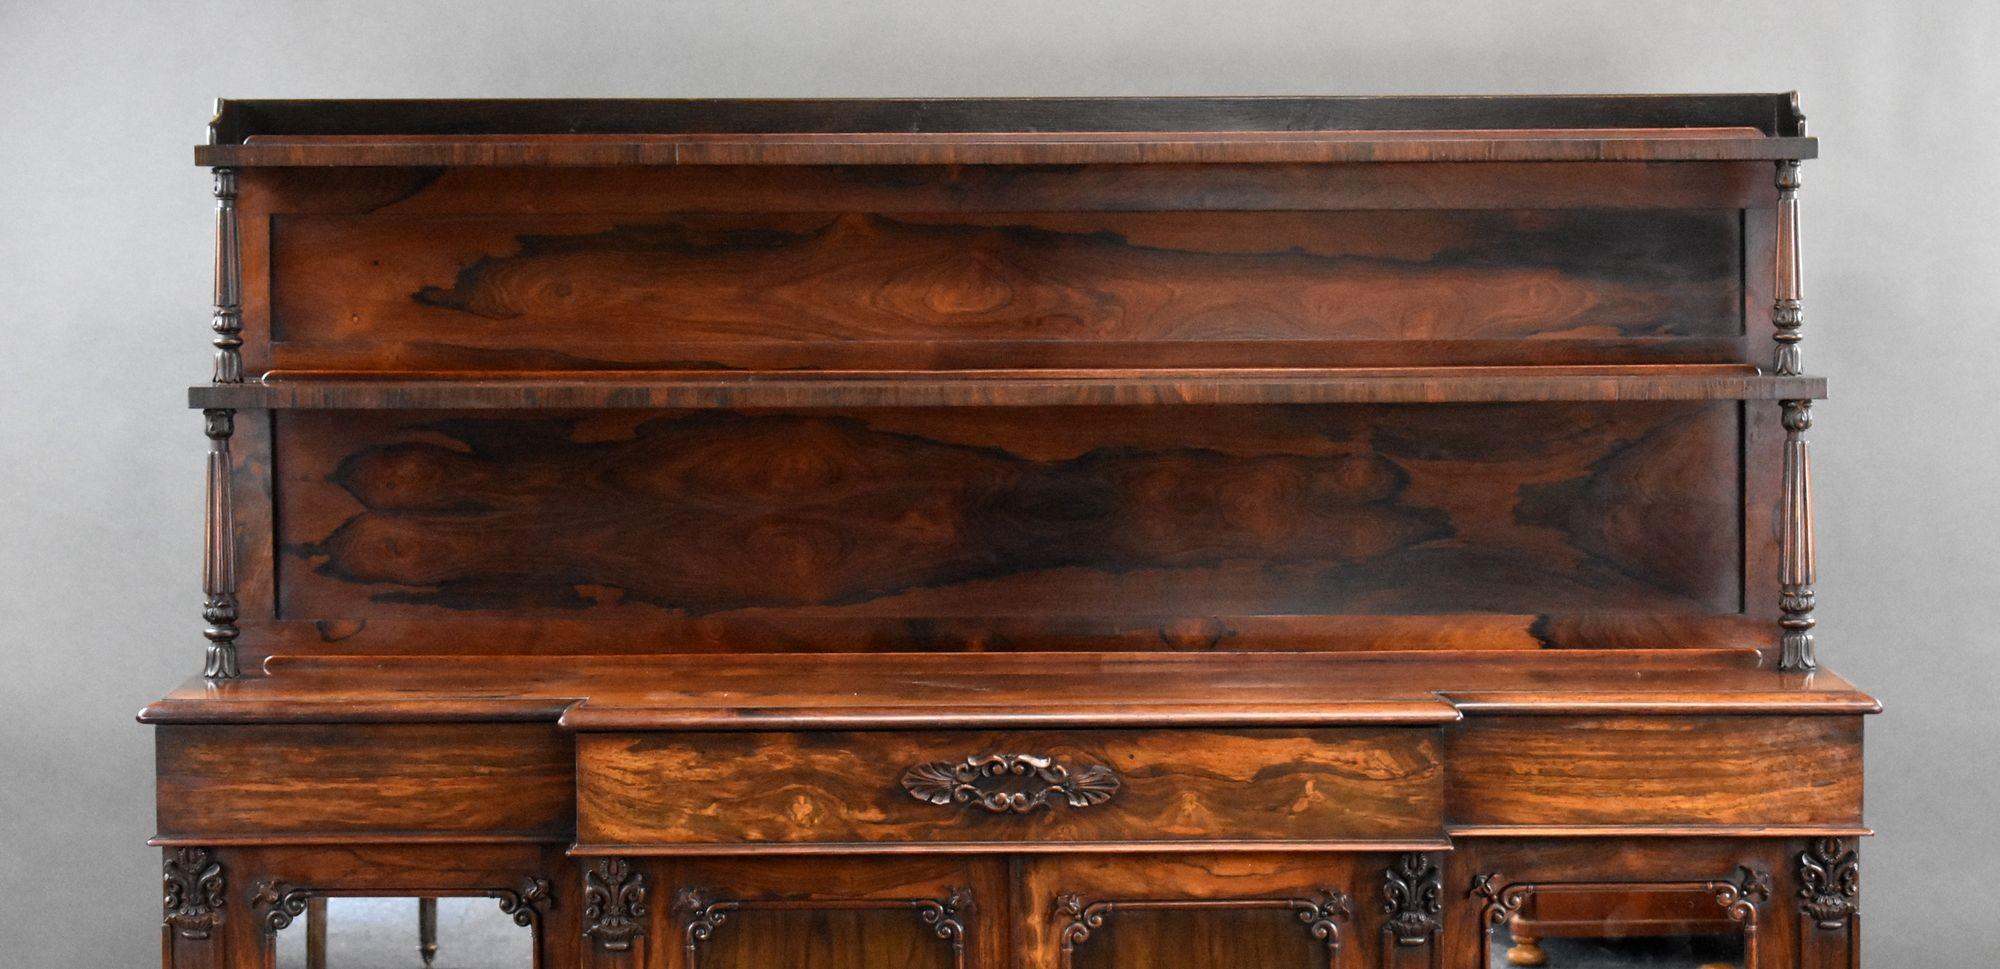 For sale is a good quality William IV rosewood sideboard, having a two tiered super structure supported by ornate columns, above three drawers with four cupboard doors below. Overall the sideboard is in very good condition showing minor signs of